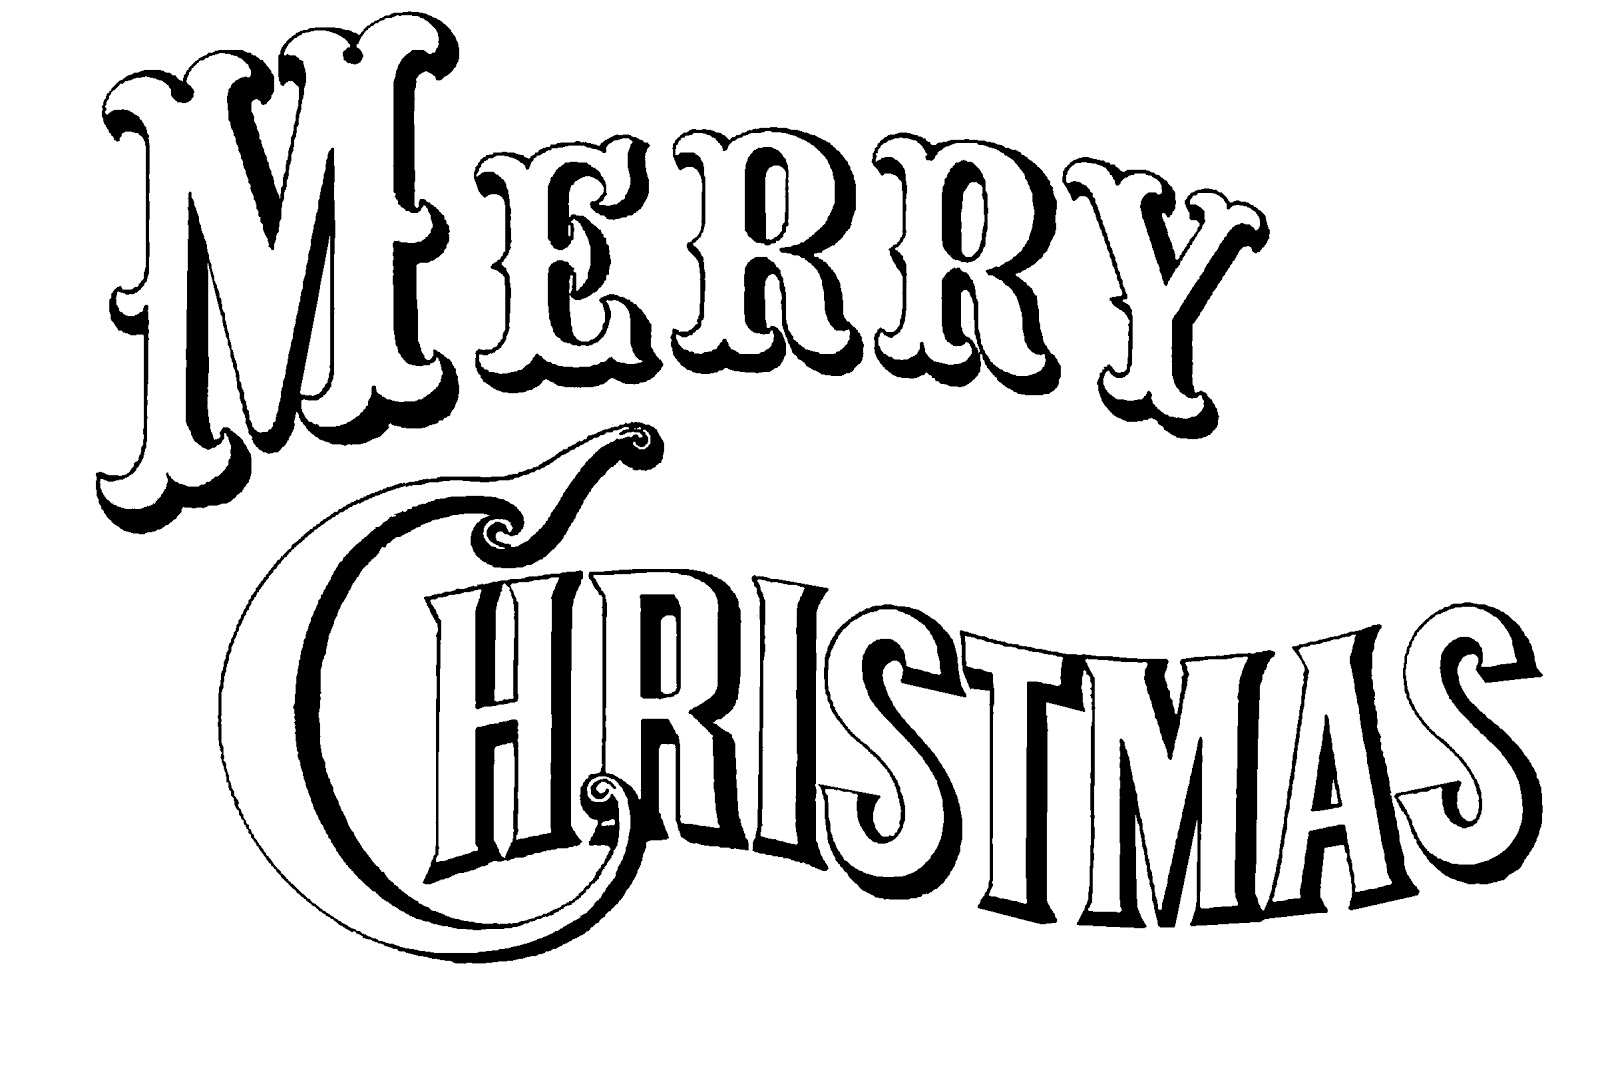 Merry Christmas Clip Art – Black And White – Happy Holidays!